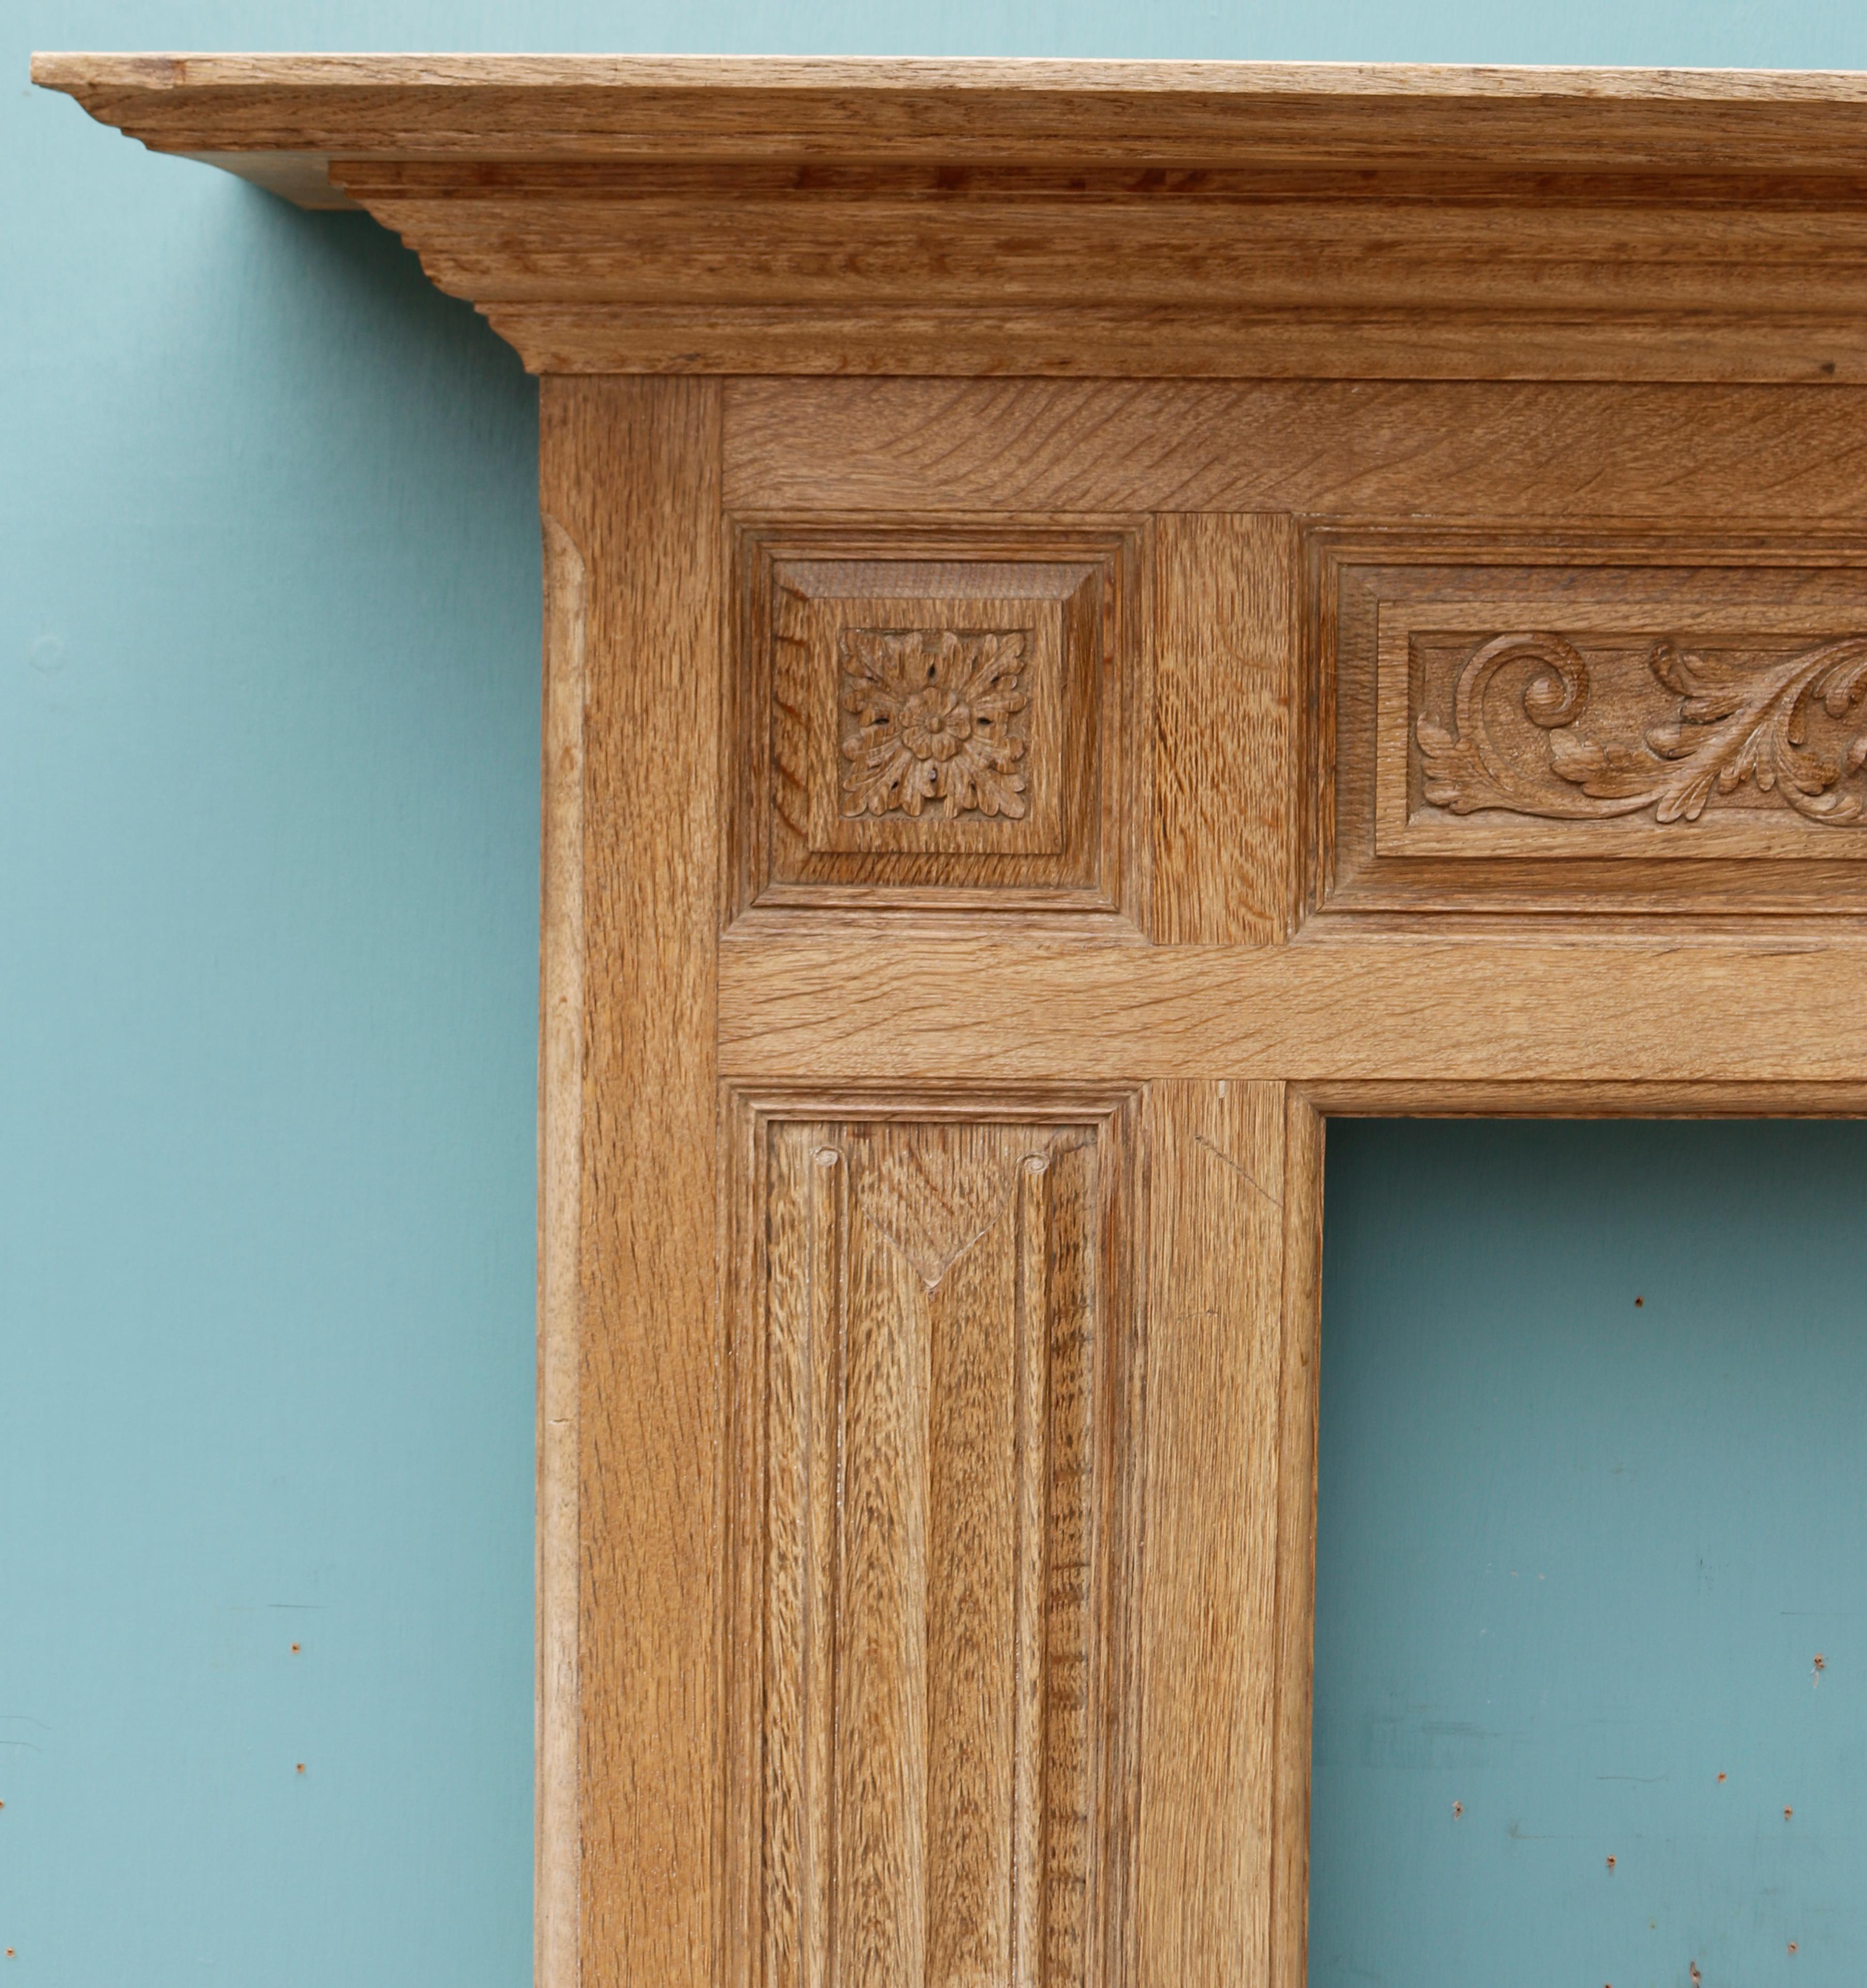 Carved Oak Antique Mantel In Fair Condition For Sale In Wormelow, Herefordshire